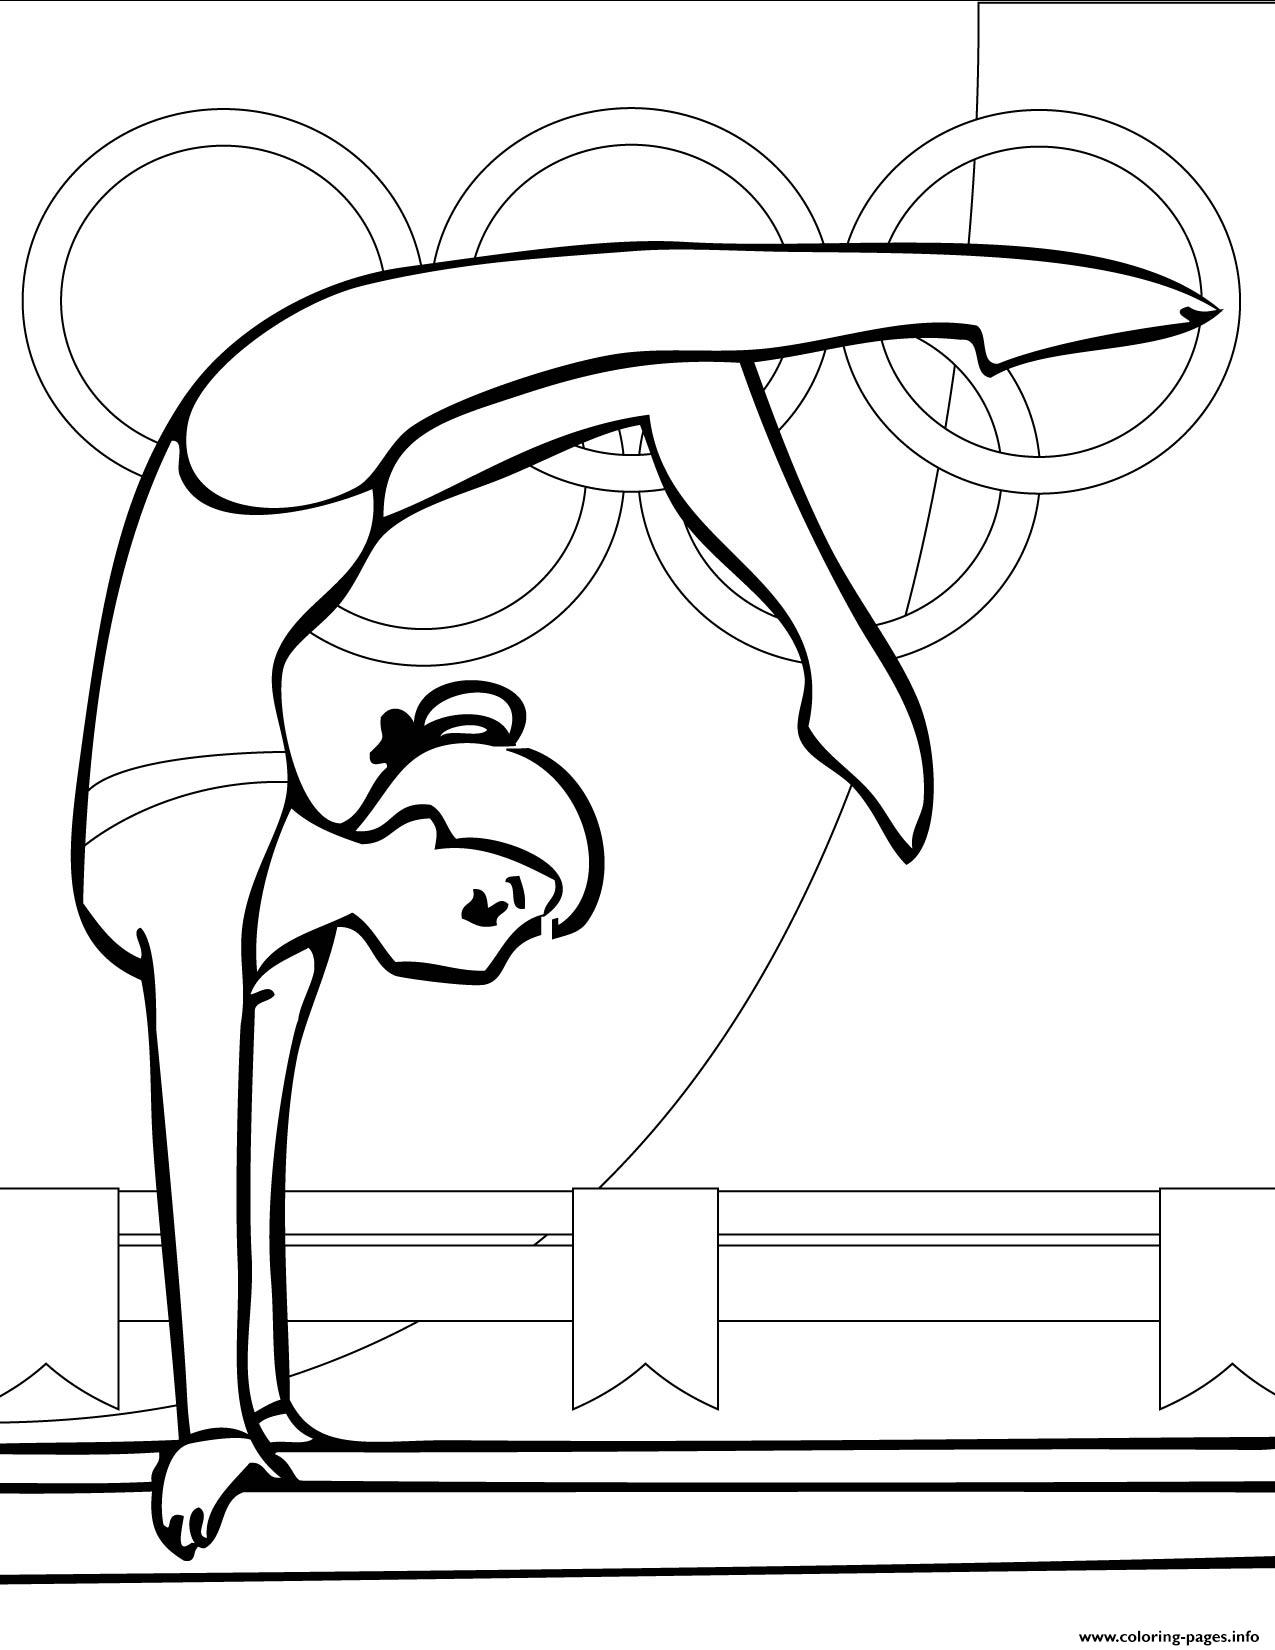 Coloring Pages For Kids Gymnastics The Balanceb3ae coloring